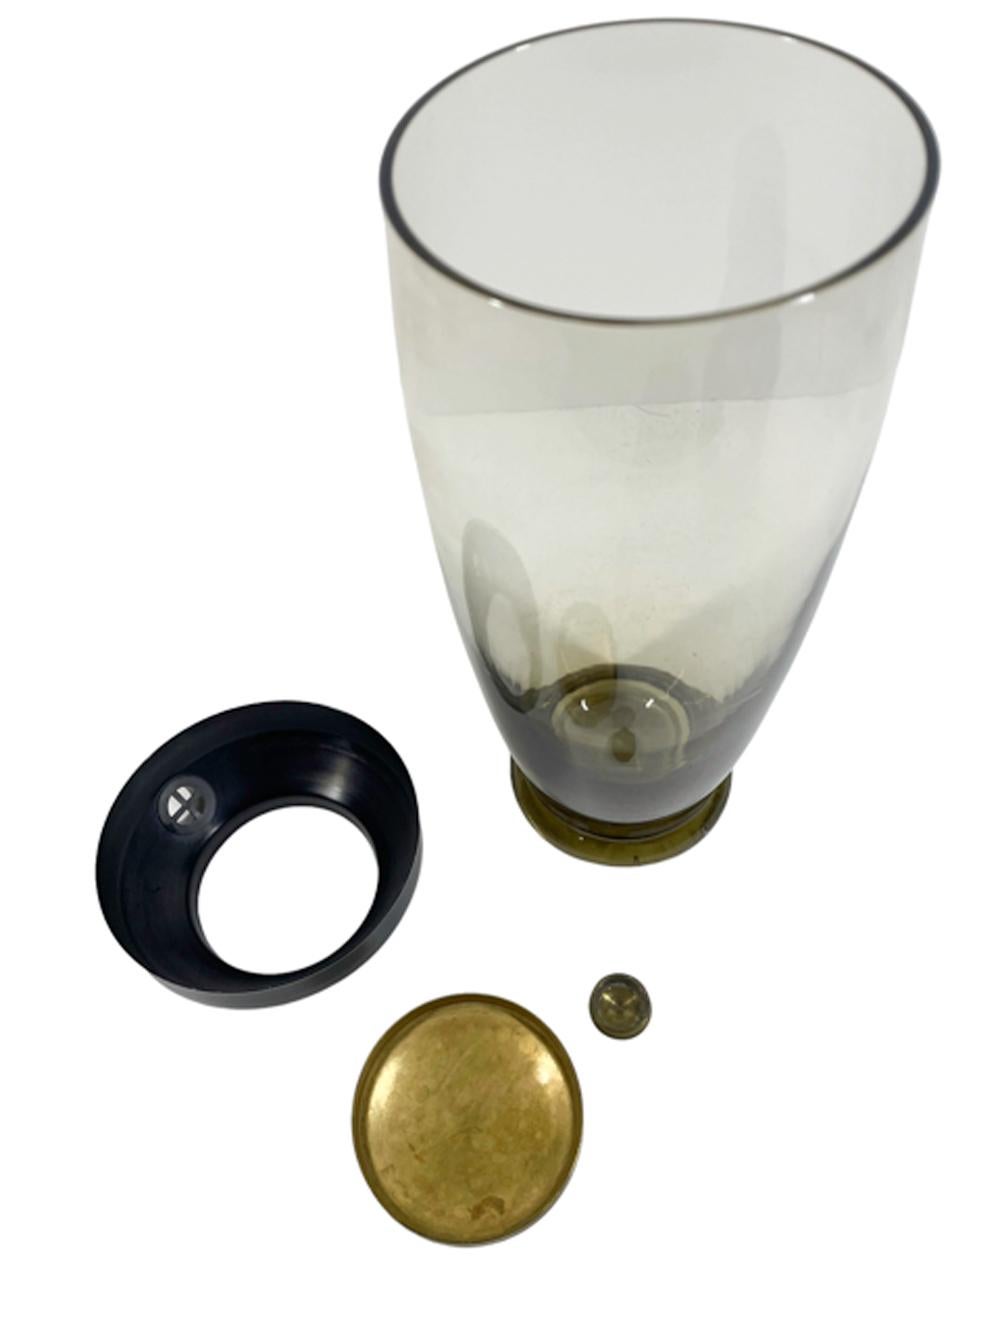 Art Deco cocktail shaker of pale olive green glass of tapered form on a thick circular foot and topped with a black enameled cover with a brass lid and pour spout cap.